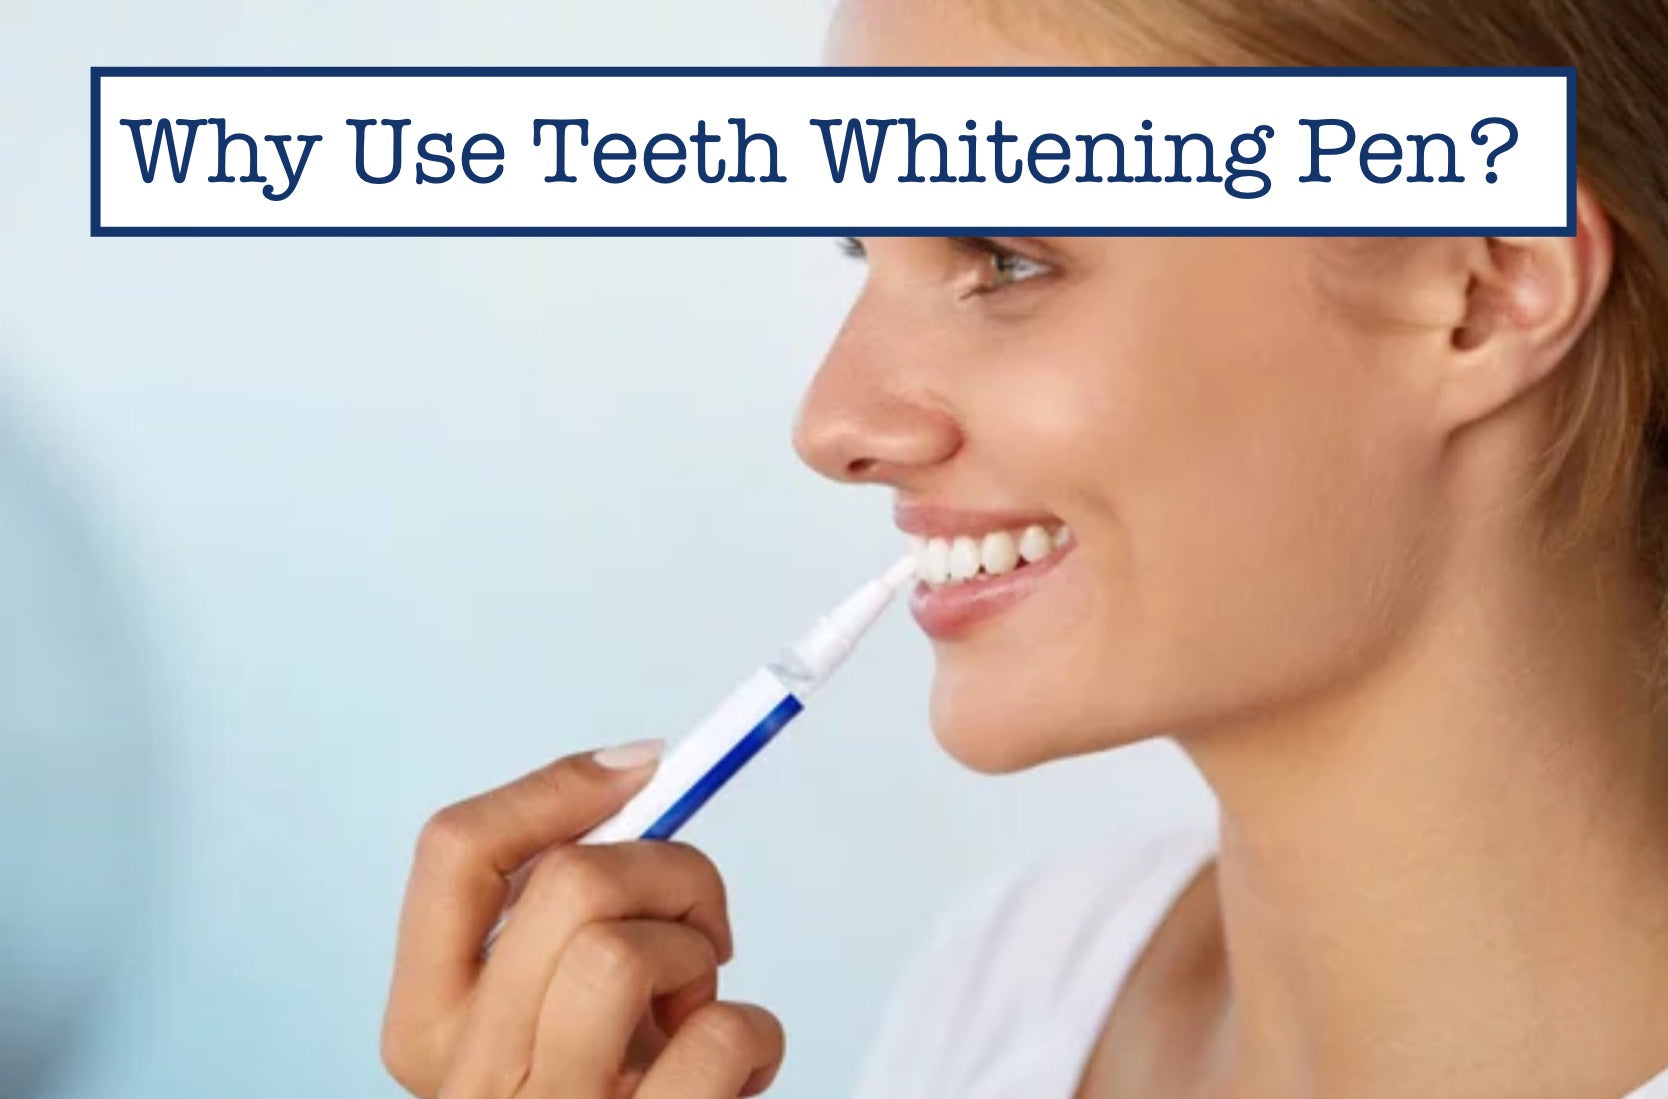 Why Use Teeth Whitening Pen?